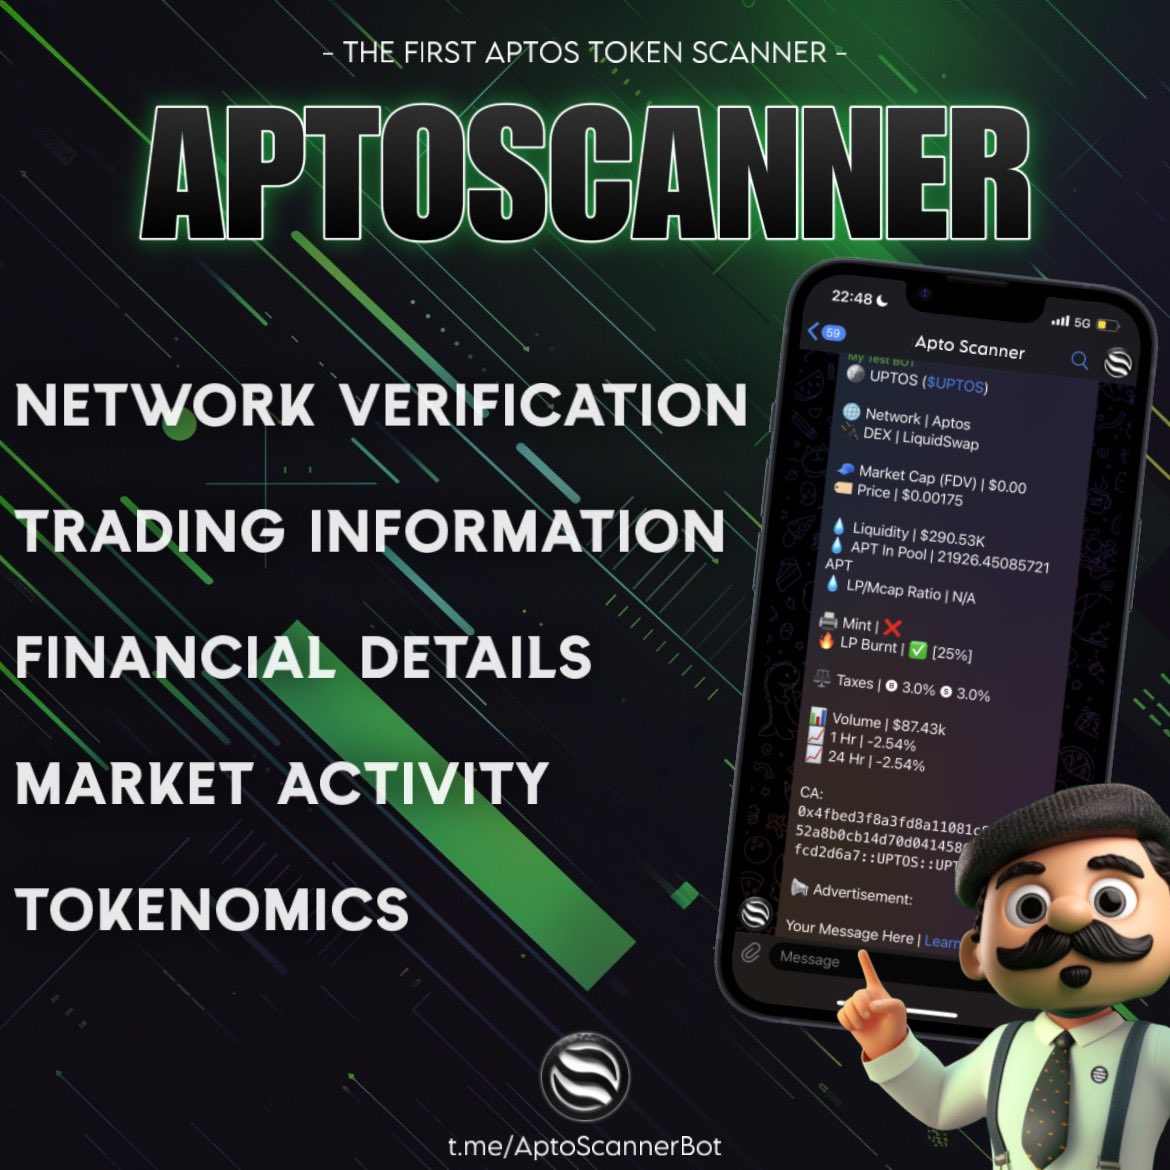 Elevate your trading game with #AptoScanner, the first Telegram token scanner bot for the #Aptos Network! 🌐 Gain unmatched insights, advertise, and be part of our pioneering community. Let's revolutionize $APT together, one scan at a time! $APTO 🔍 t.me/AptoScannerBot